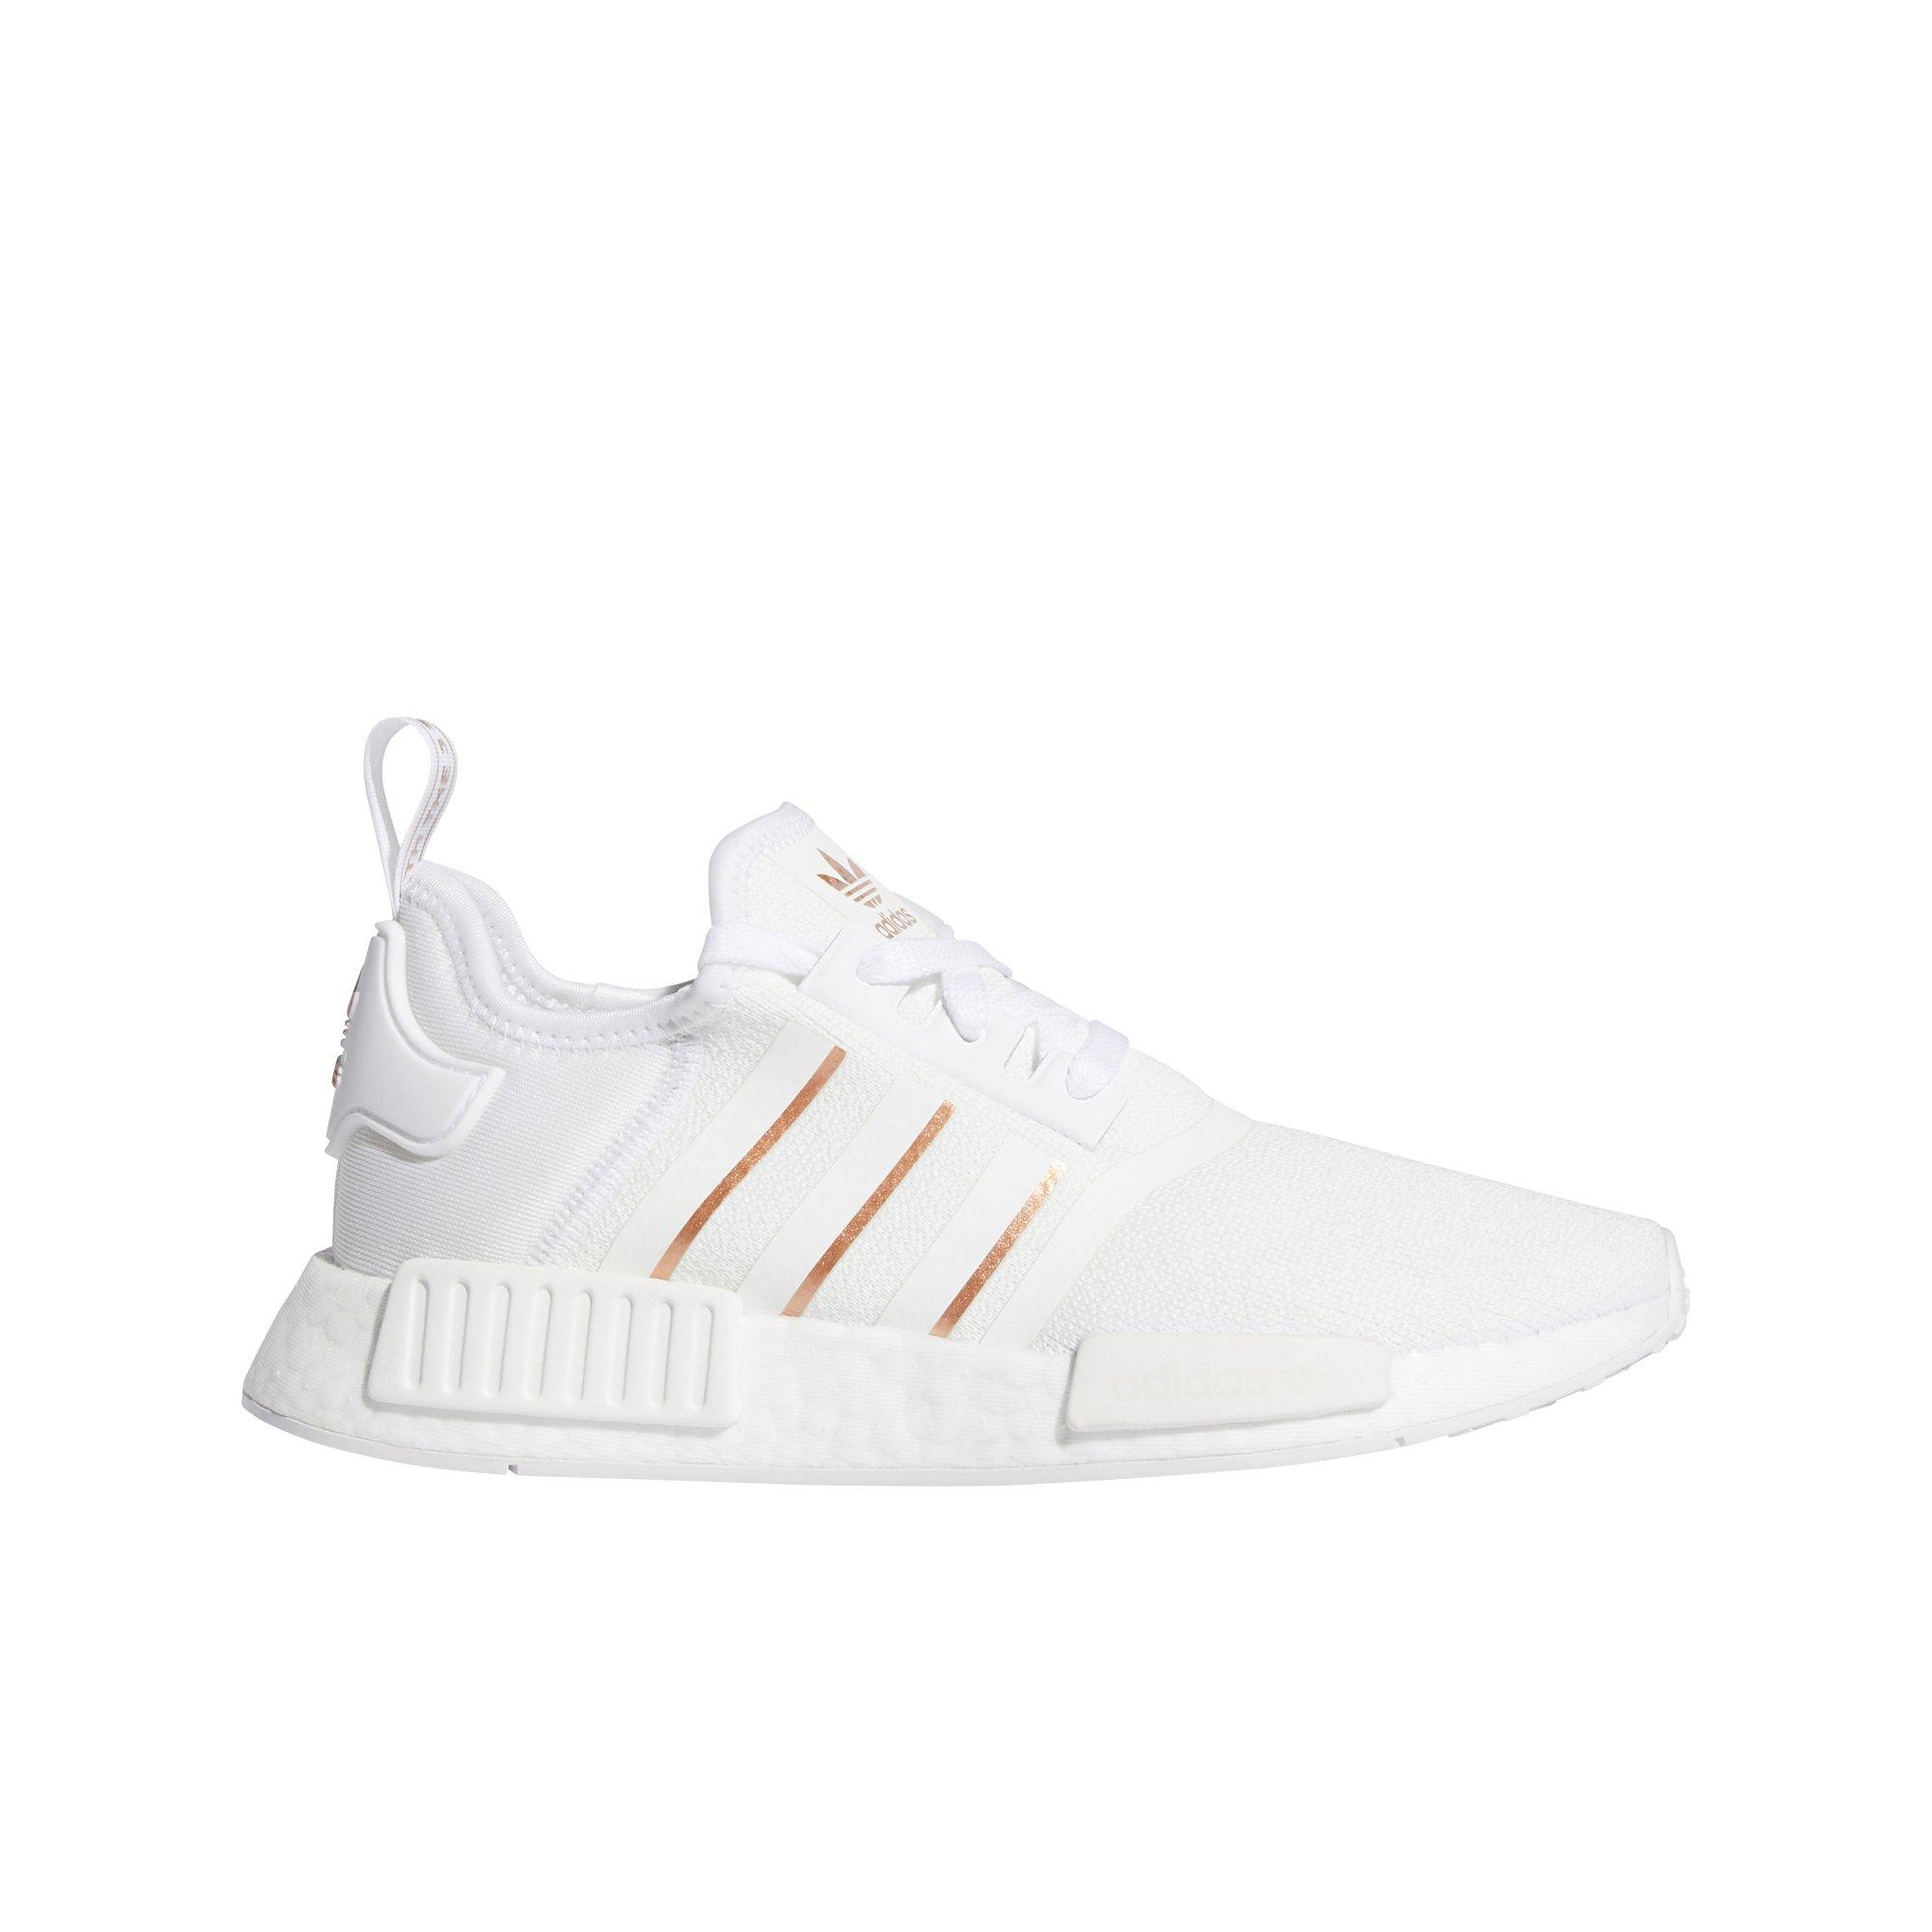 adidas womens shoes white and gold